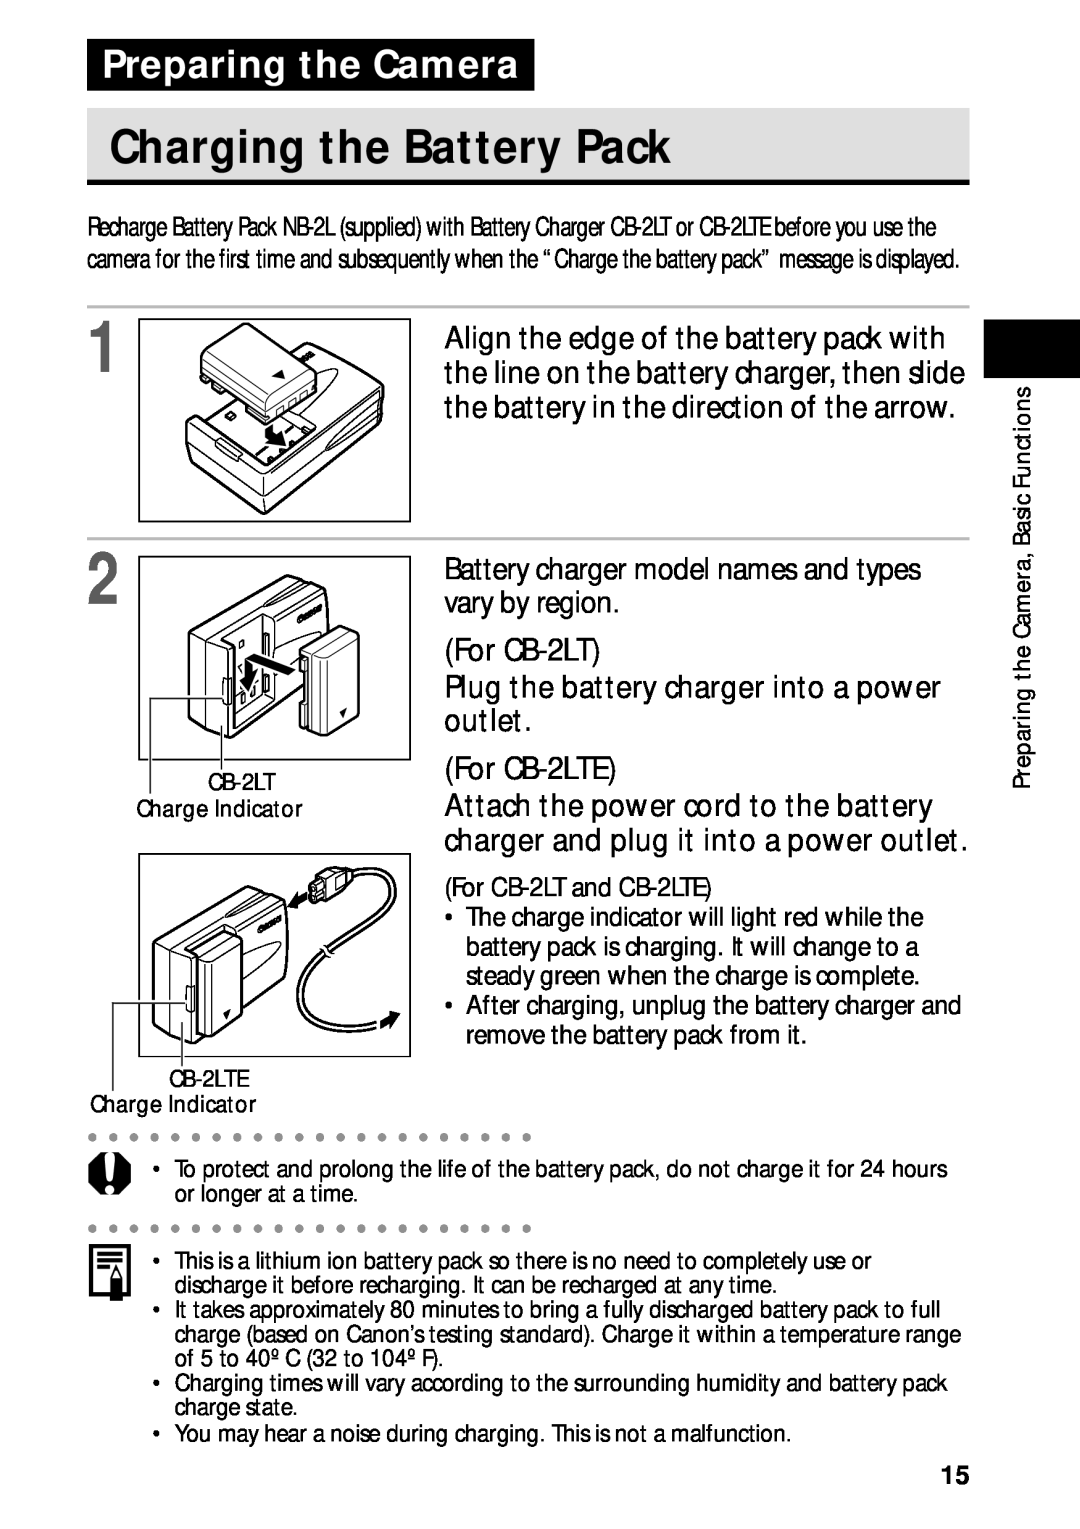 Canon PowerShot S45 manual Charging the Battery Pack, Preparing the Camera, Align the edge of the battery pack with 